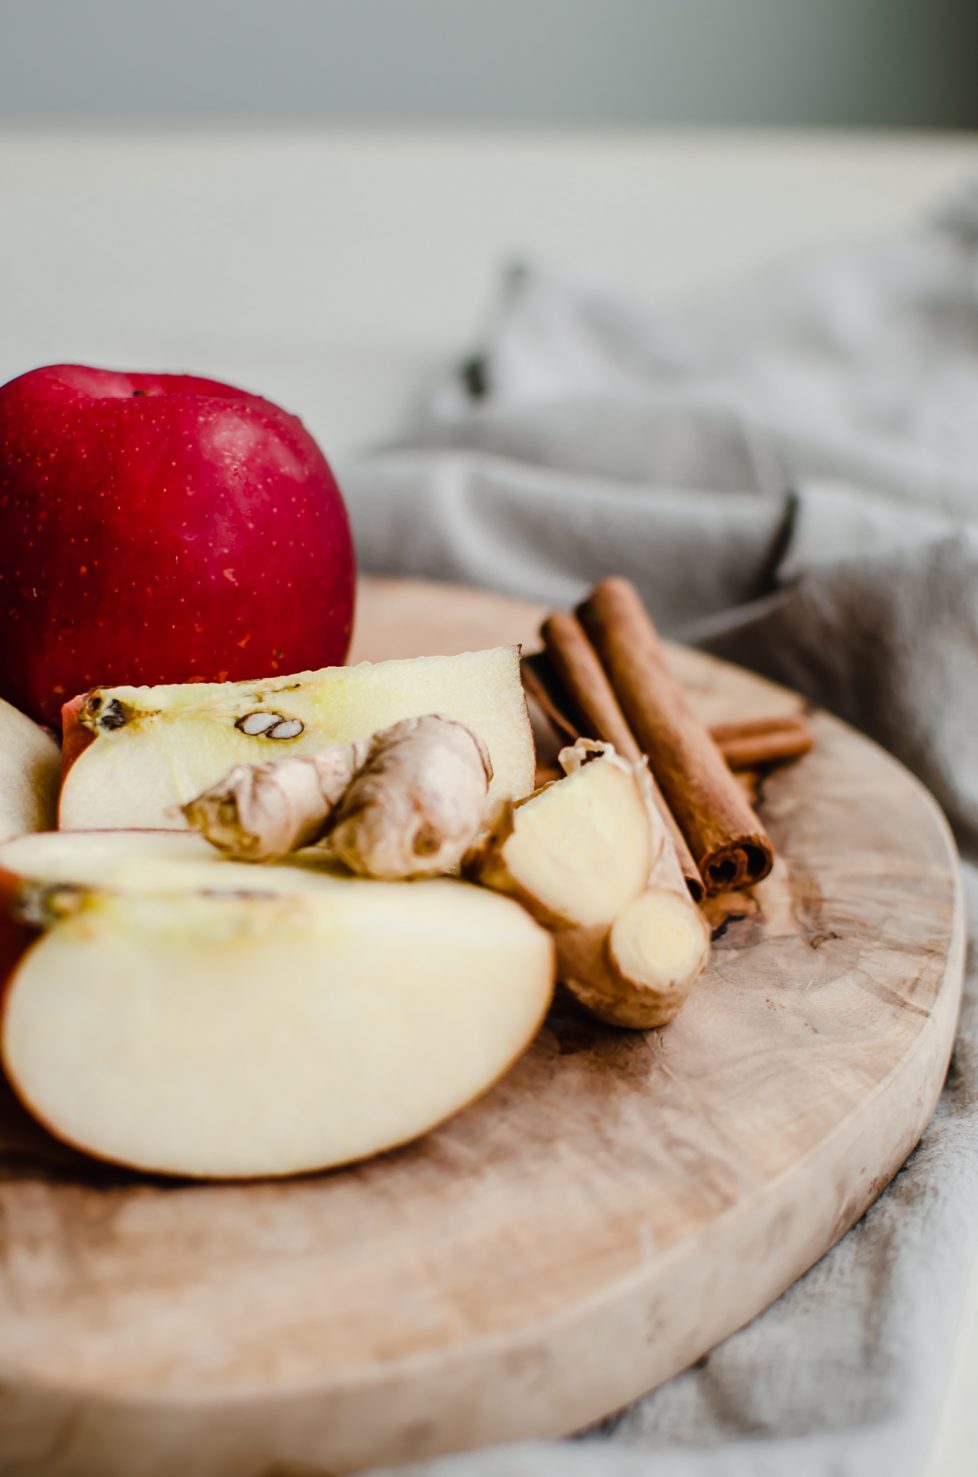 A cutting board with sliced apples, fresh ginger, cinnamon sticks, and 